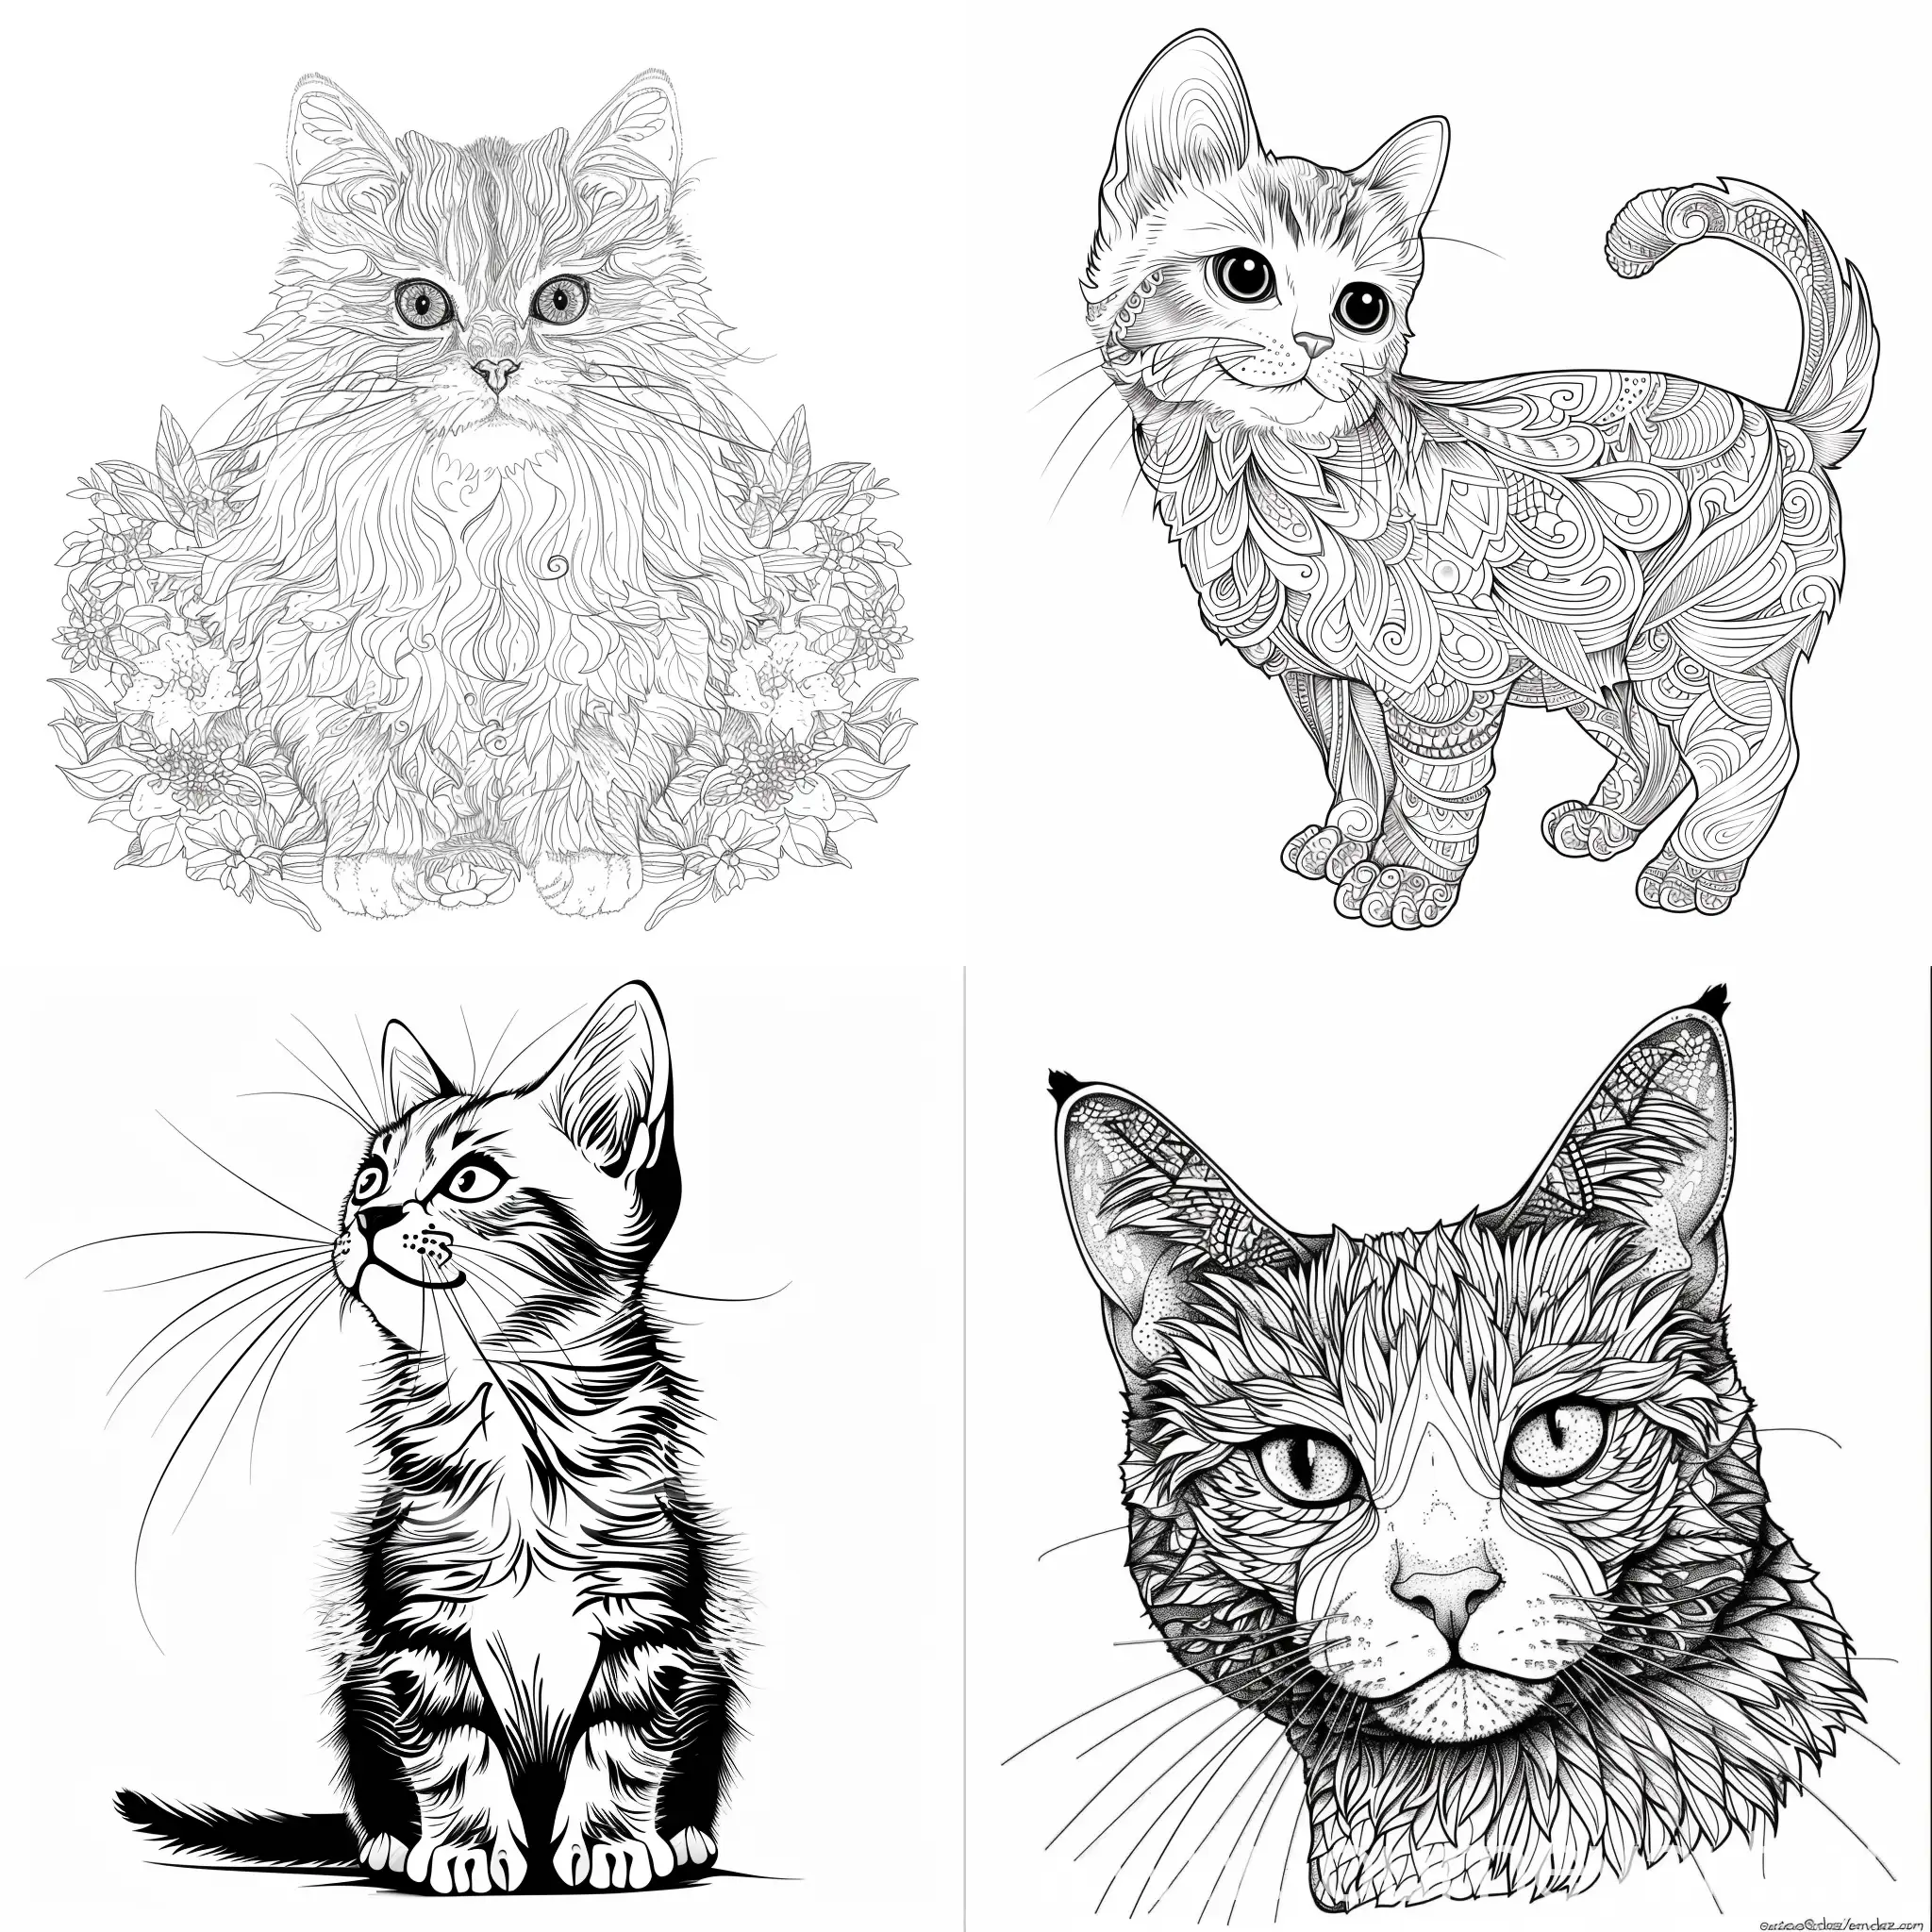 Sweet-Cat-Coloring-Book-for-Children-Playful-Feline-Illustrations-in-Black-and-White